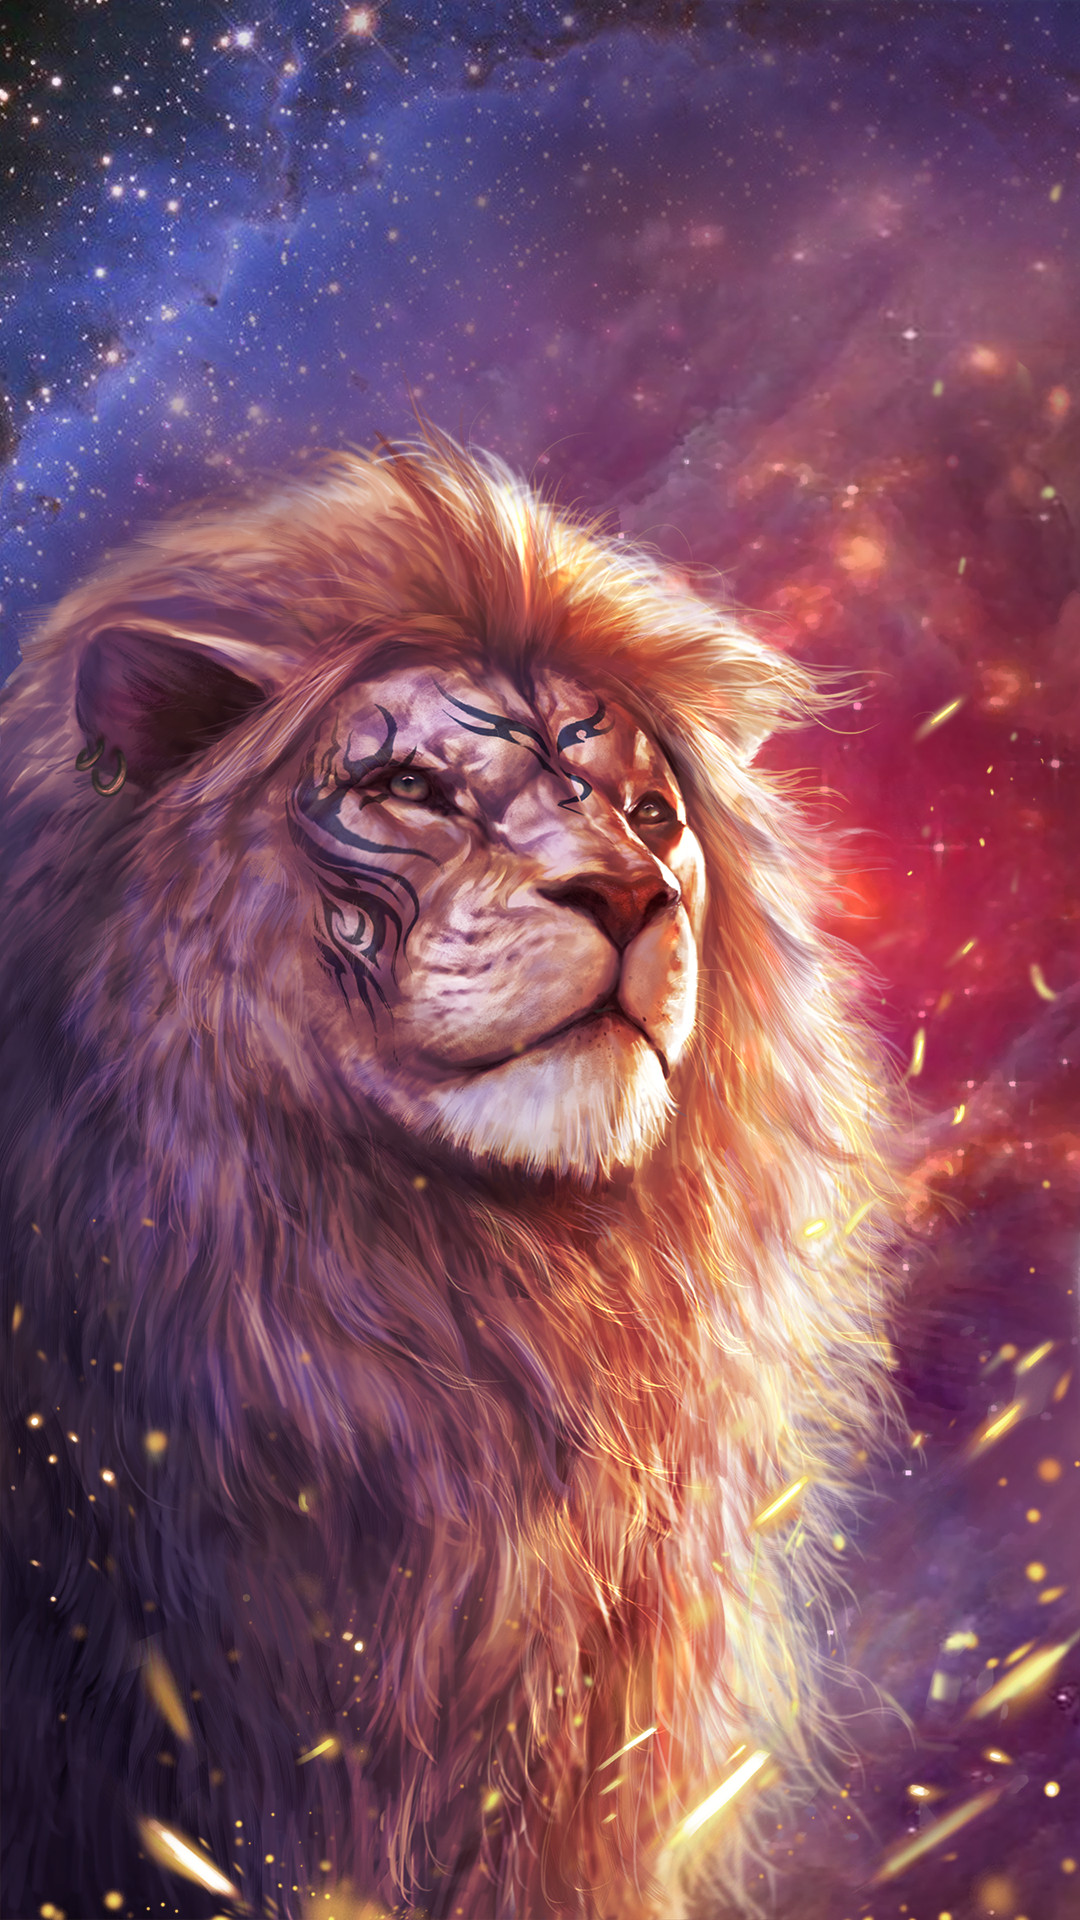 1080x1920 Cool lion wallpaper with totem tattoo!